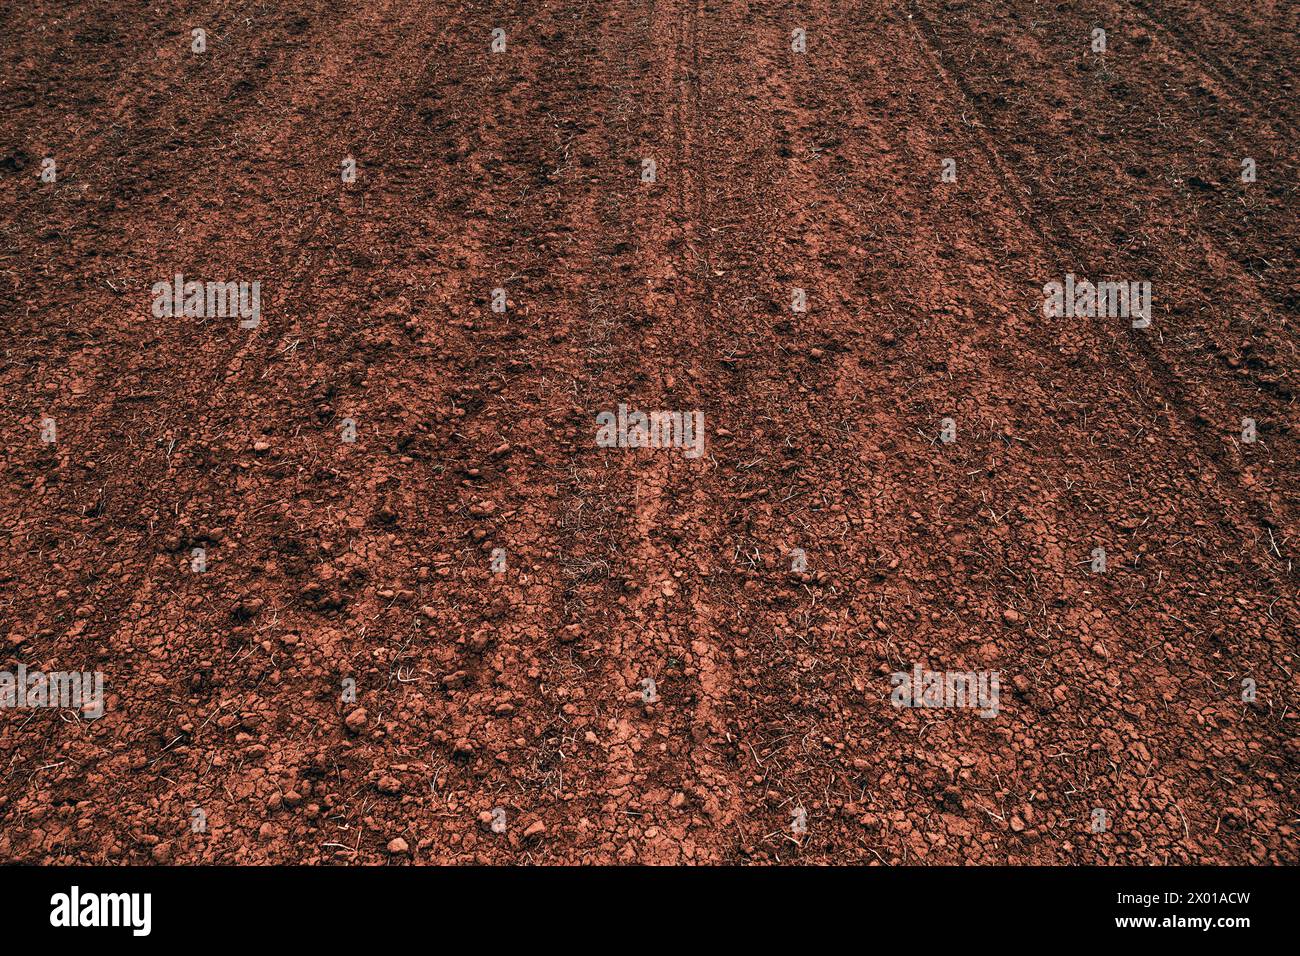 Texture of brown agricultural soil ready for tillage, diminishing perspective Stock Photo